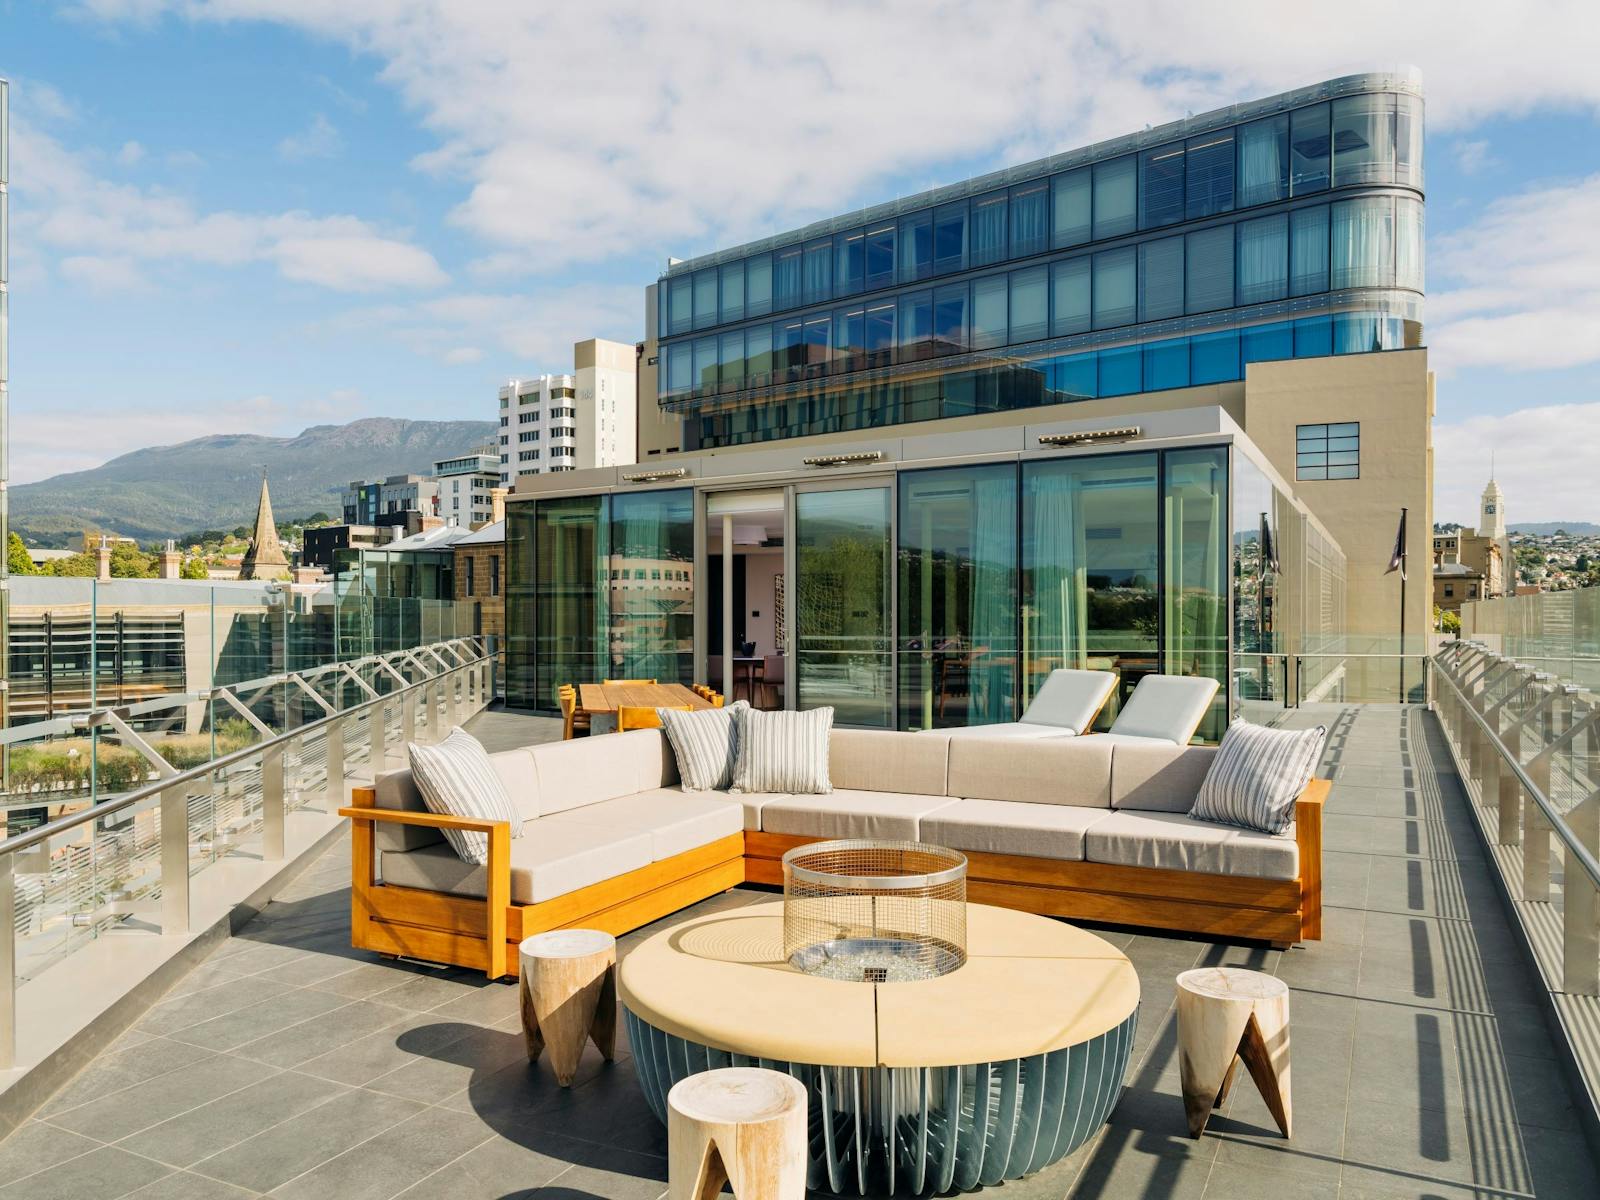 Looking across the outdoor terrace to the Aurora Suite, with kunanyi/Mt Wellington behind